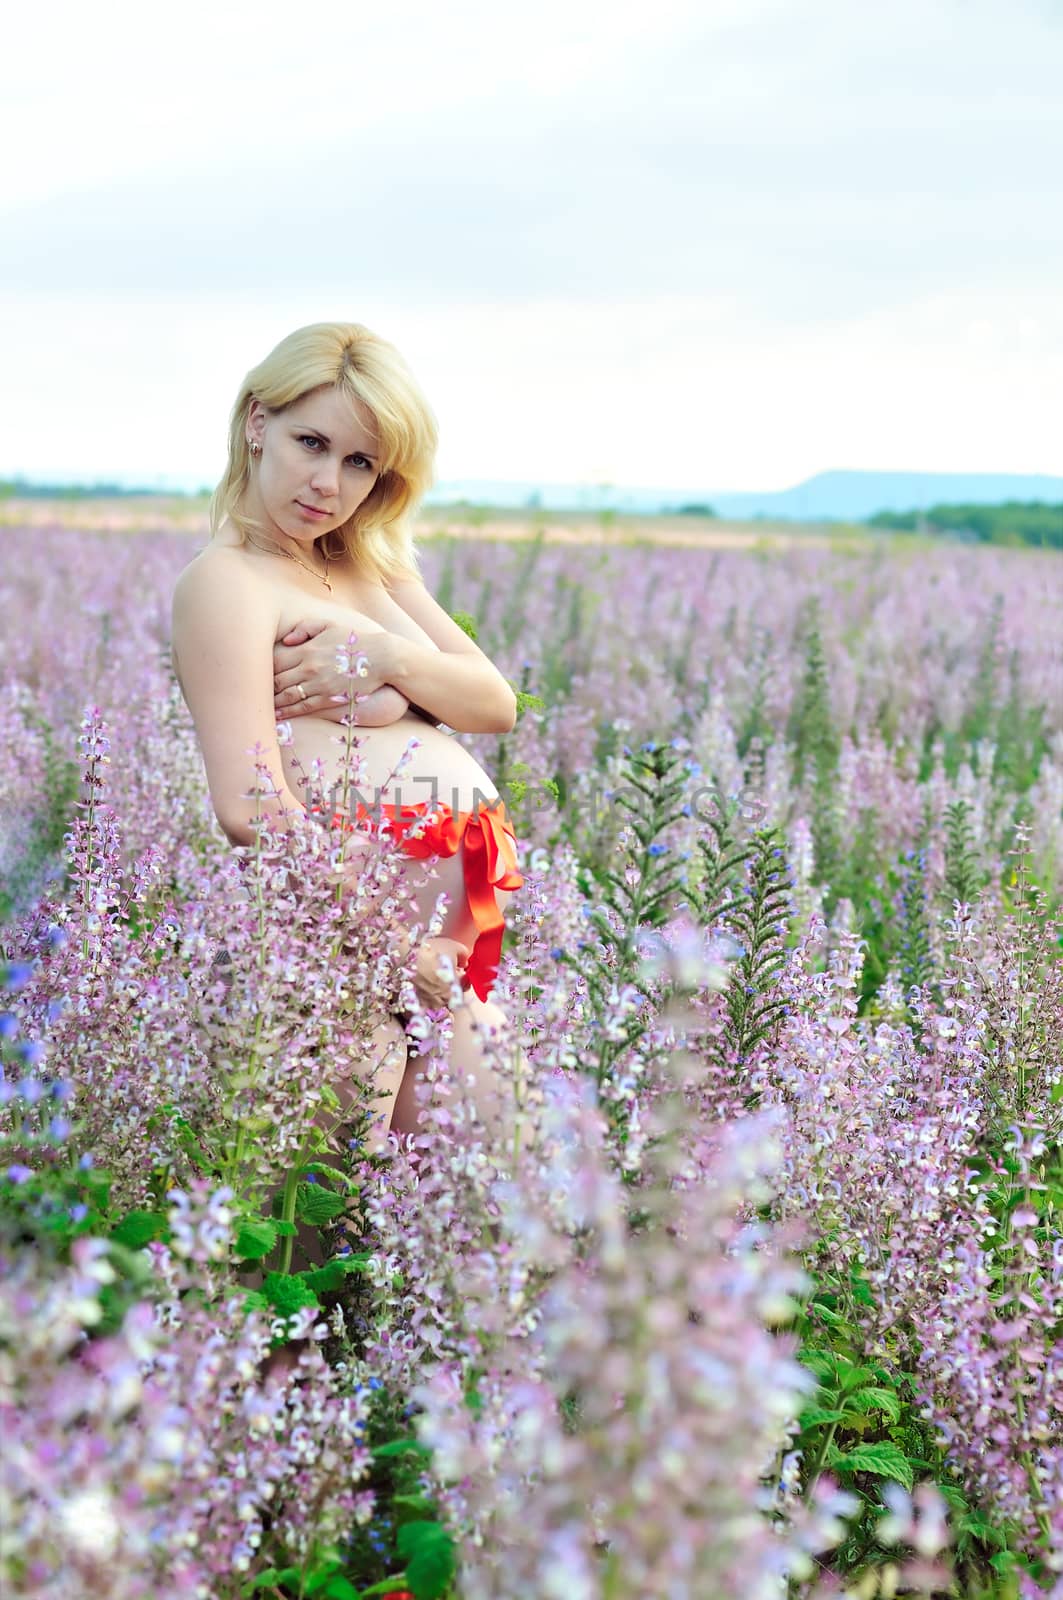 beauty blonde pregnant woman in field with red belt on the belly 